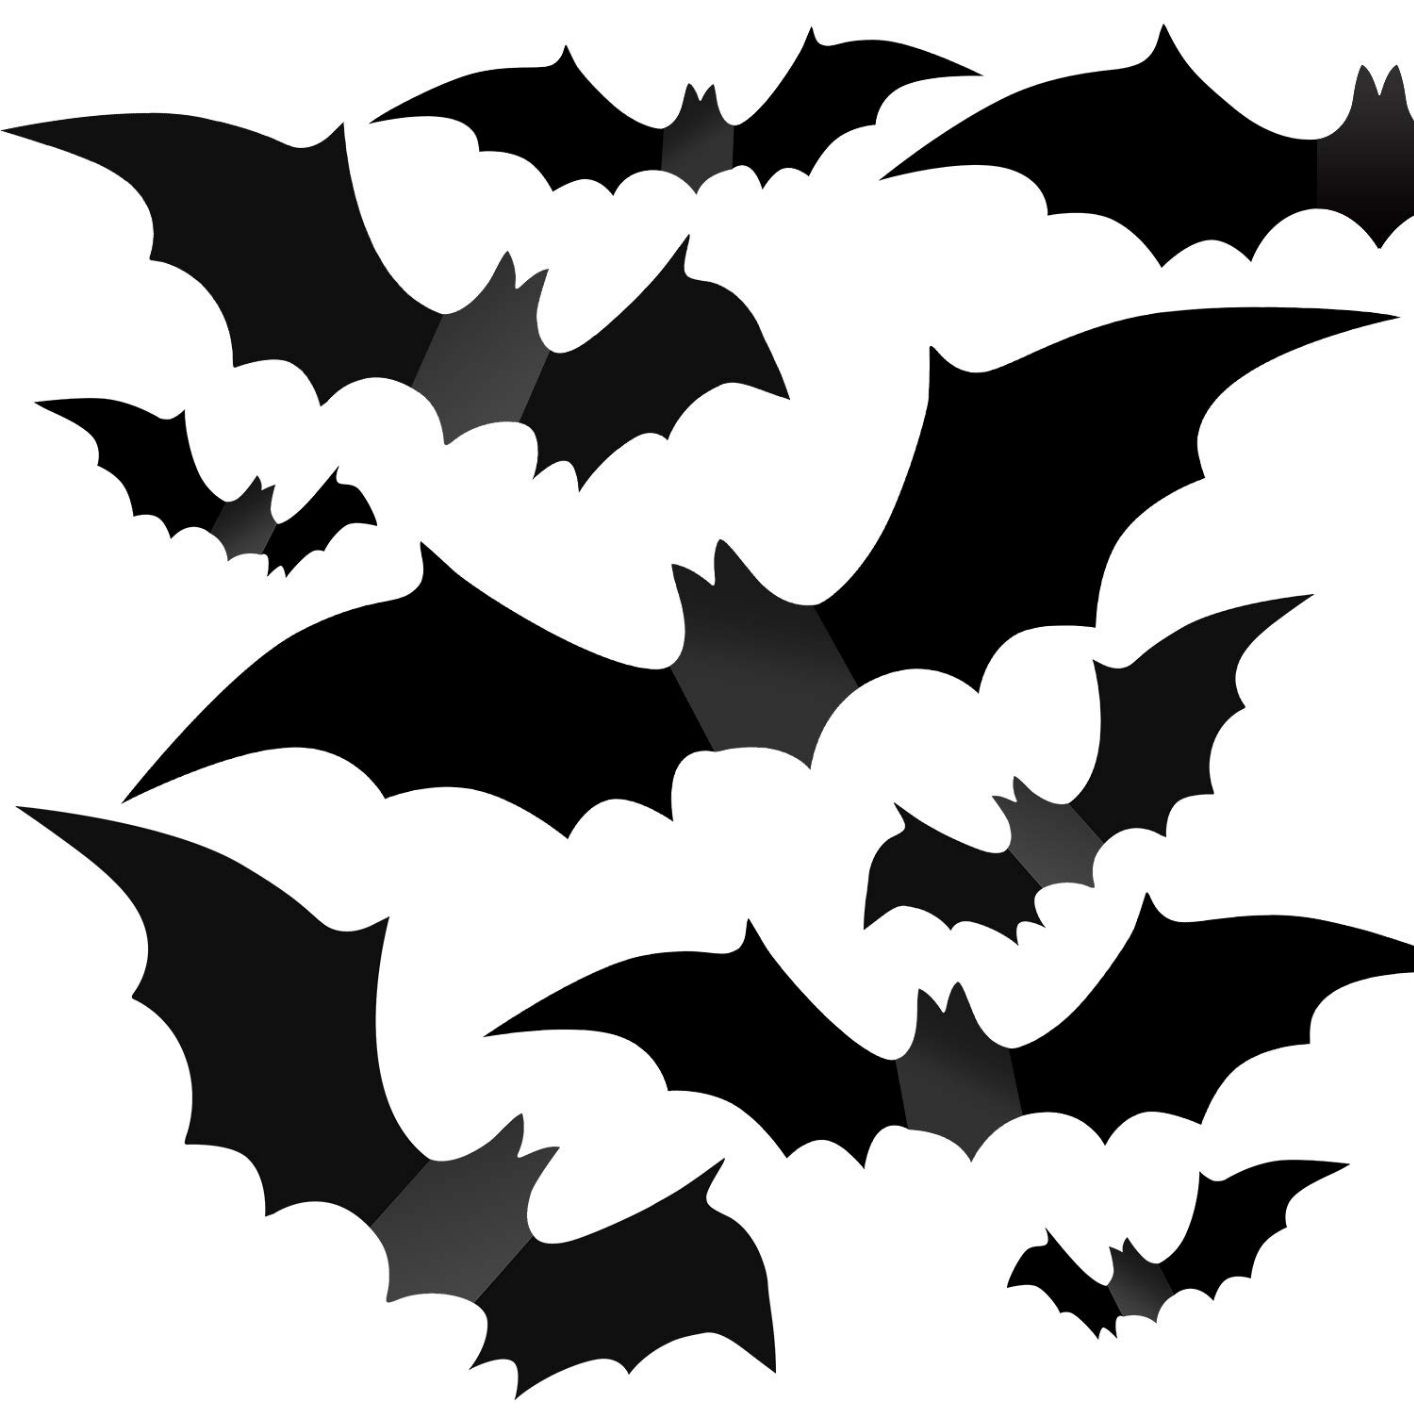 BF09 Halloween Party Indoor Outdoor Decor Supplies, 56 PCS Reusable PVC 3D Decorative Scary Bats Wall Sticker Comes with Double Sided Foam Tape